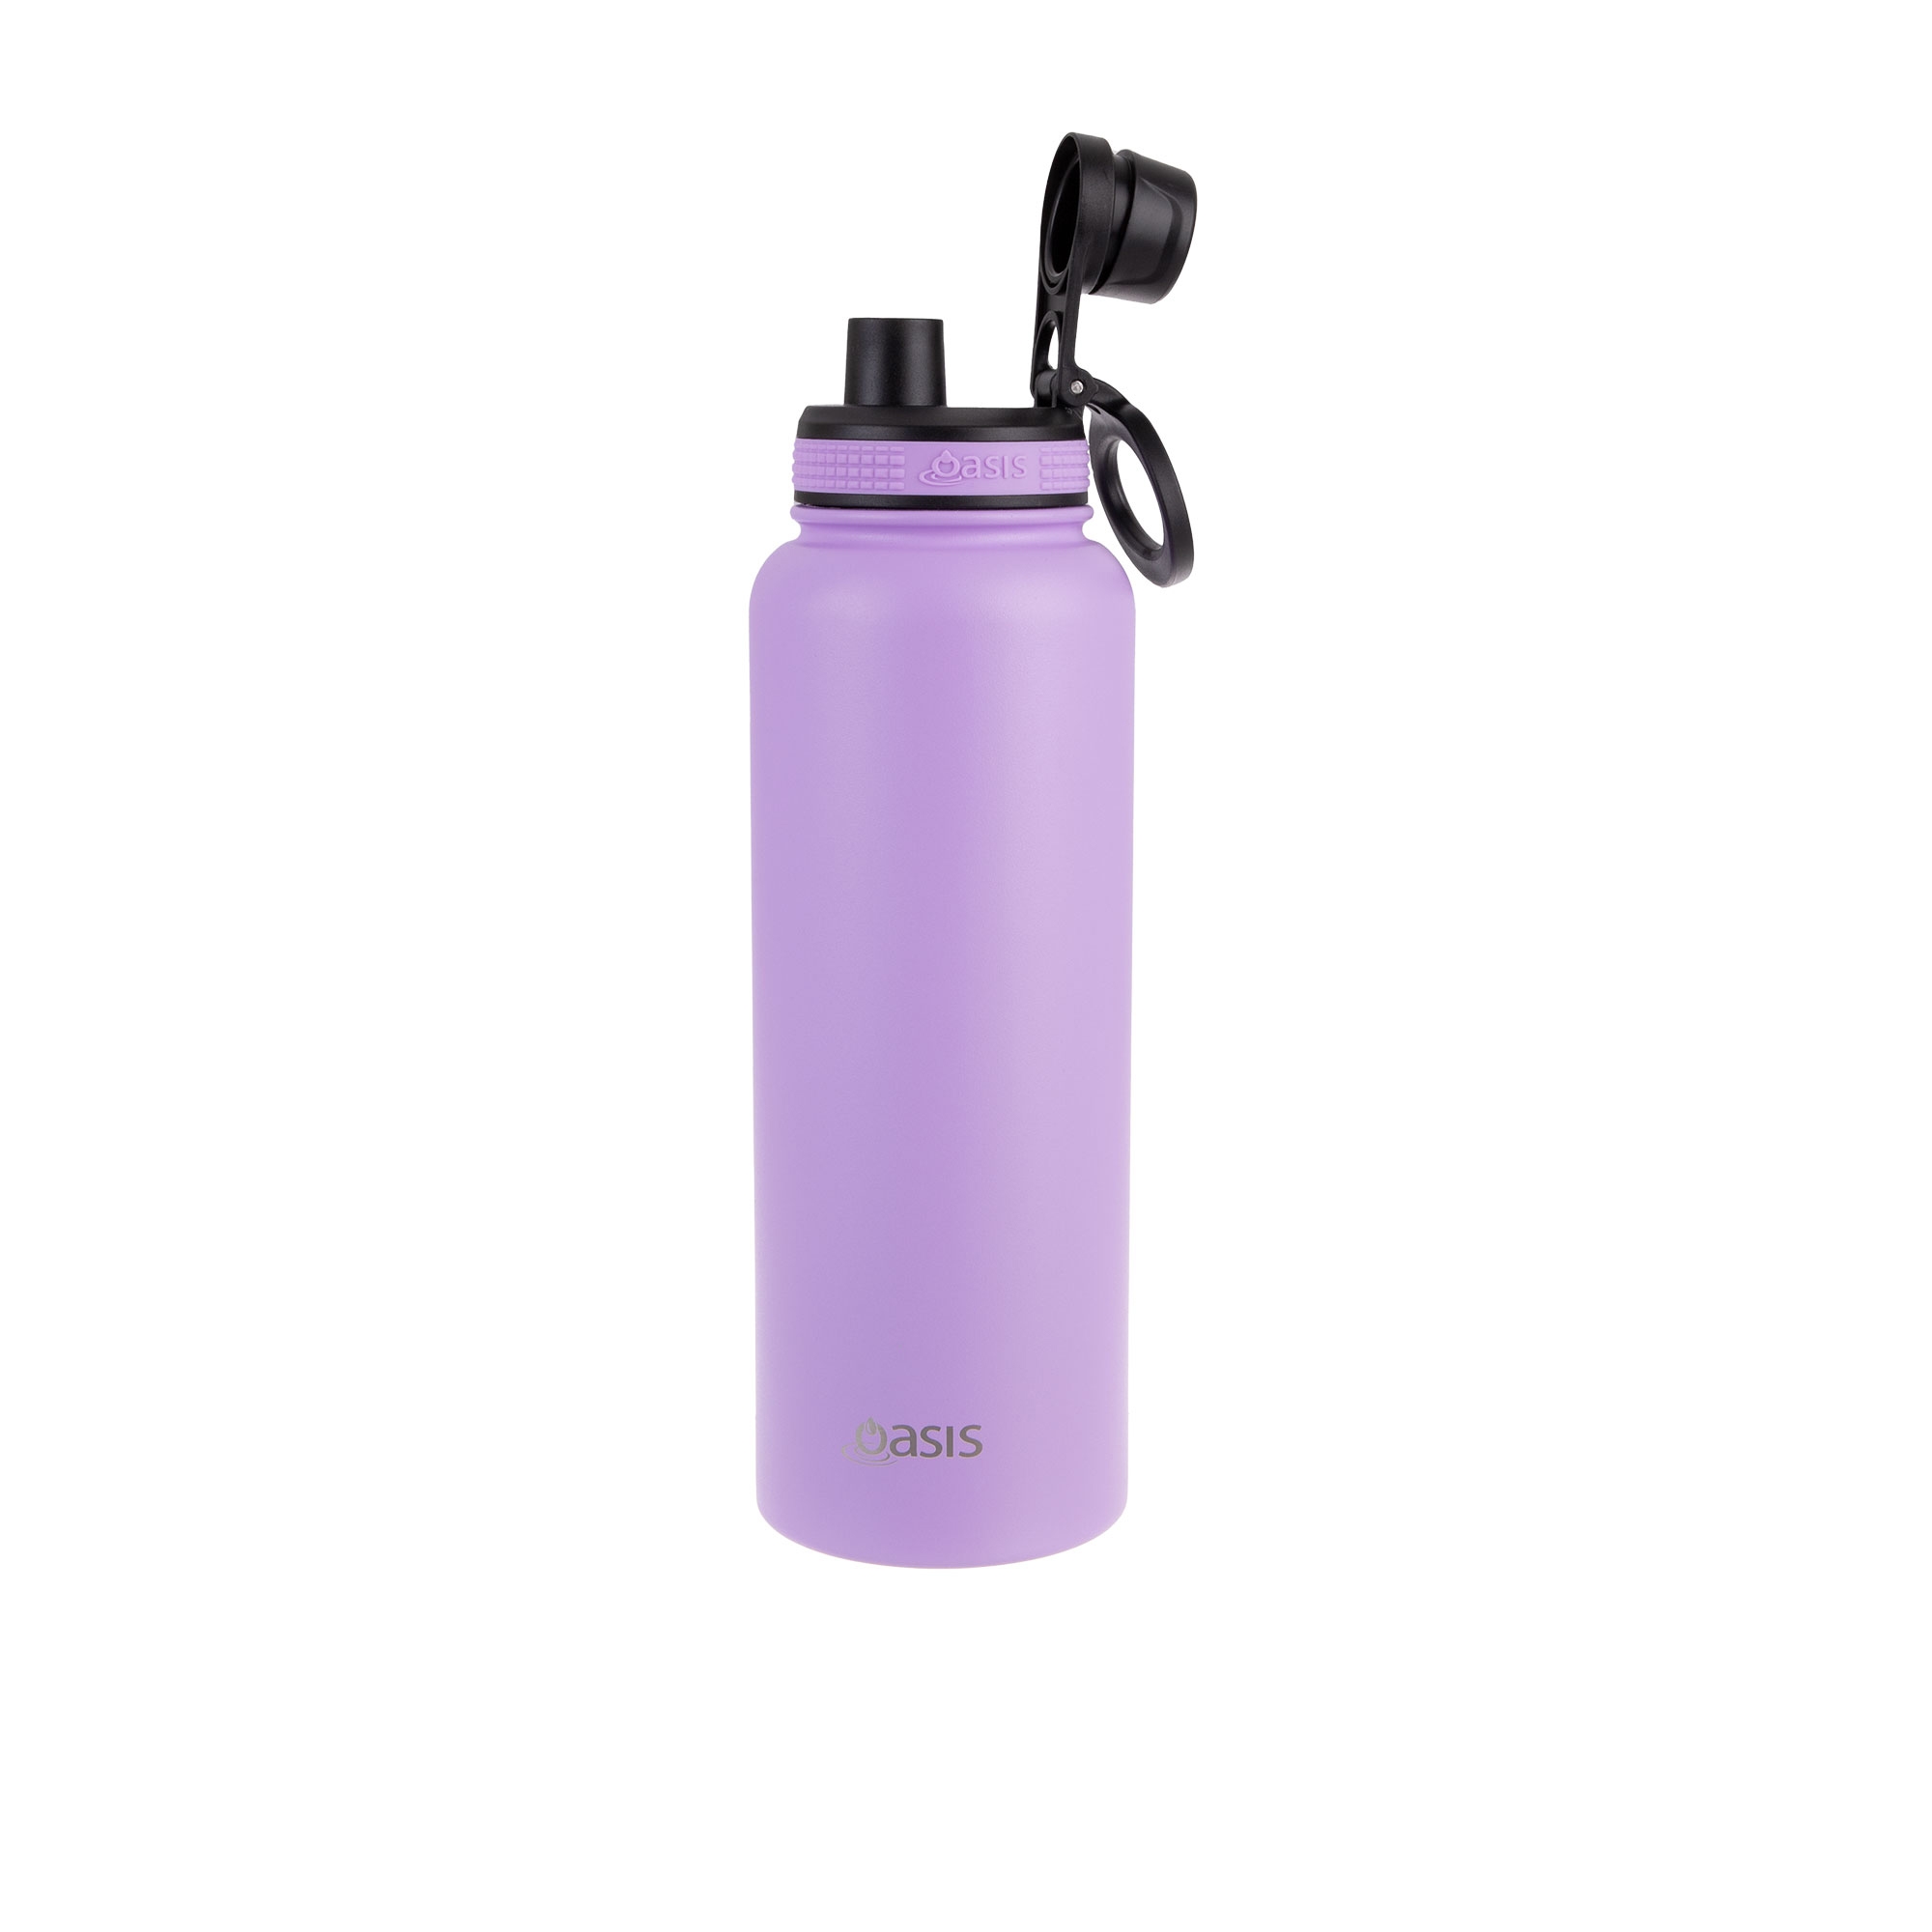 Oasis Challenger Double Wall Insulated Sports Bottle 1.1L Lavender Image 2